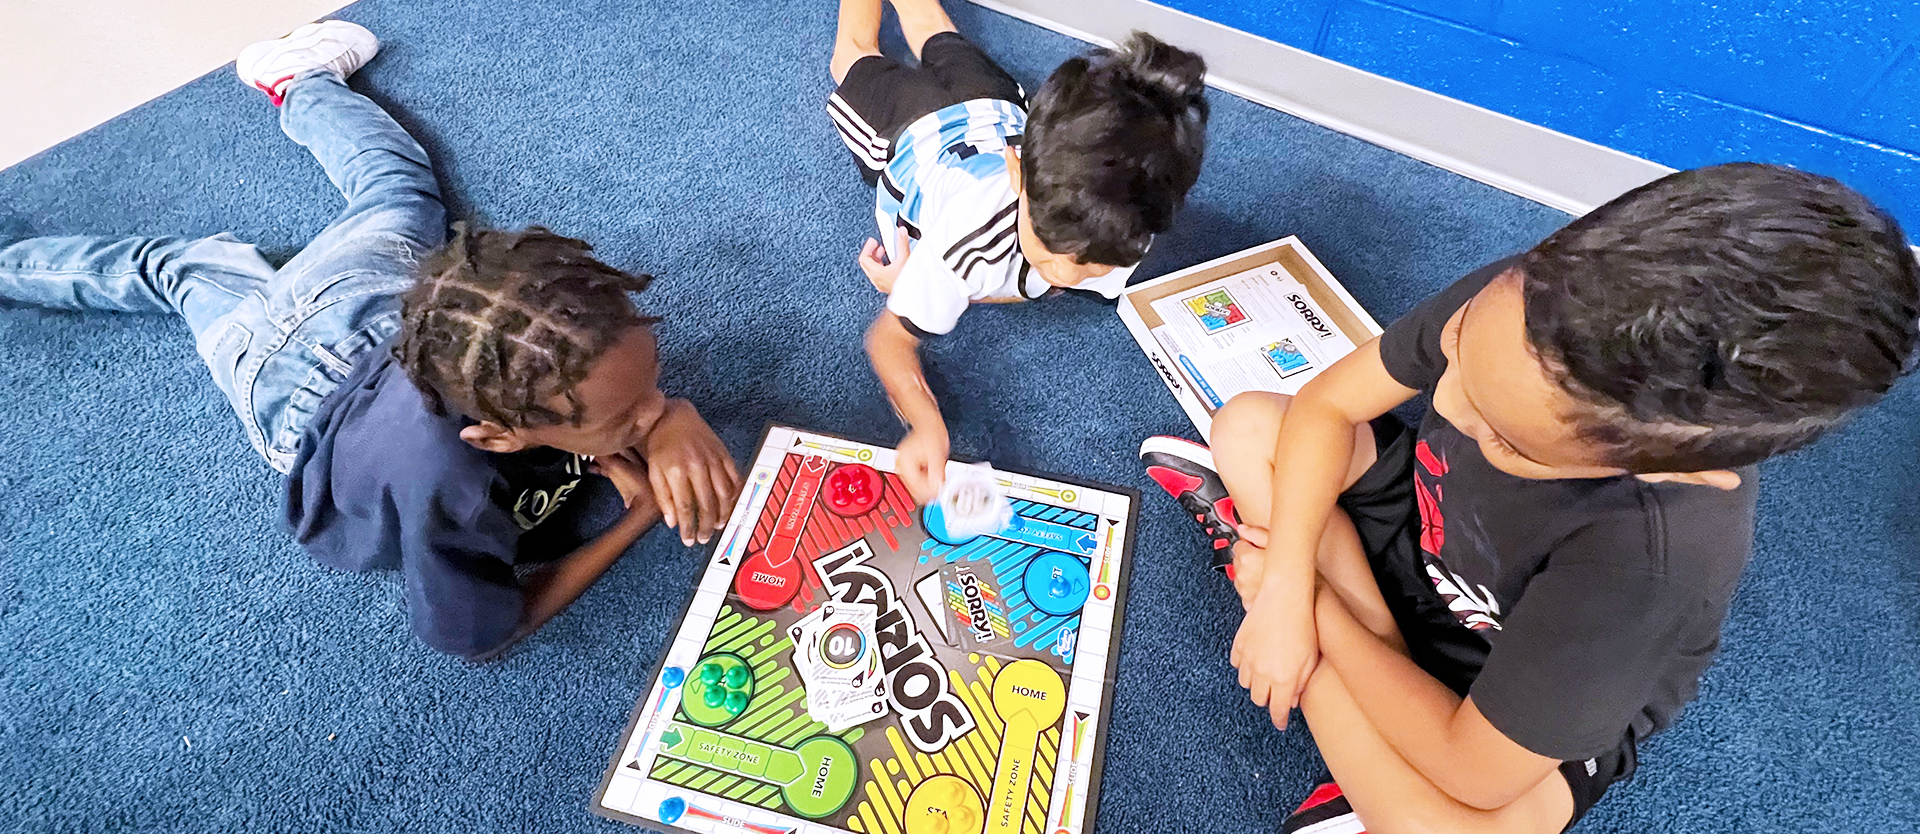 A group of students sitting on floor playing a game.